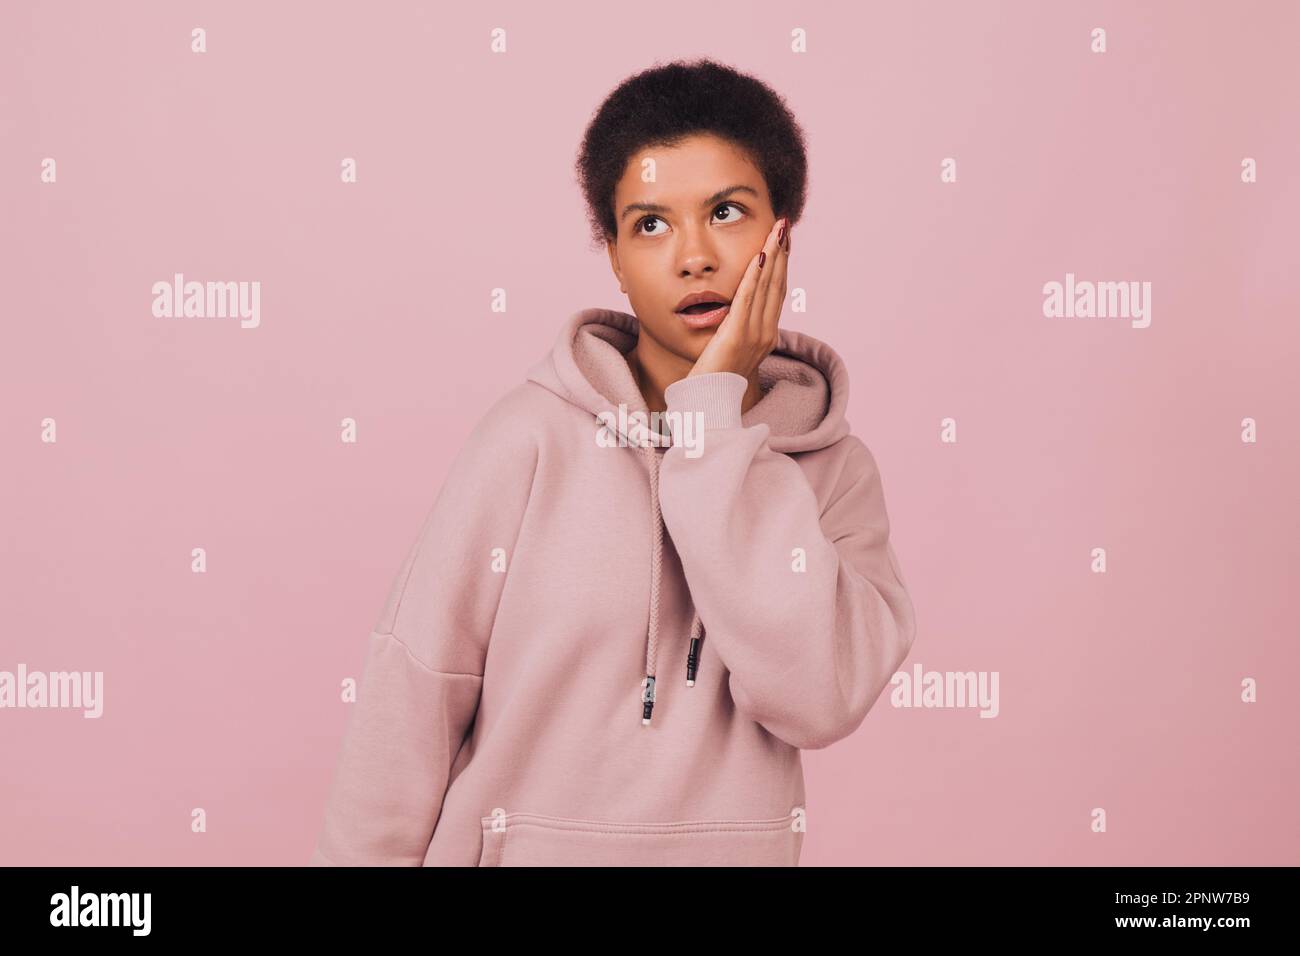 Excited black girl standing on pink backdrop. Young woman wearing casual clothes standing with shocked face emotion and looking up Stock Photo